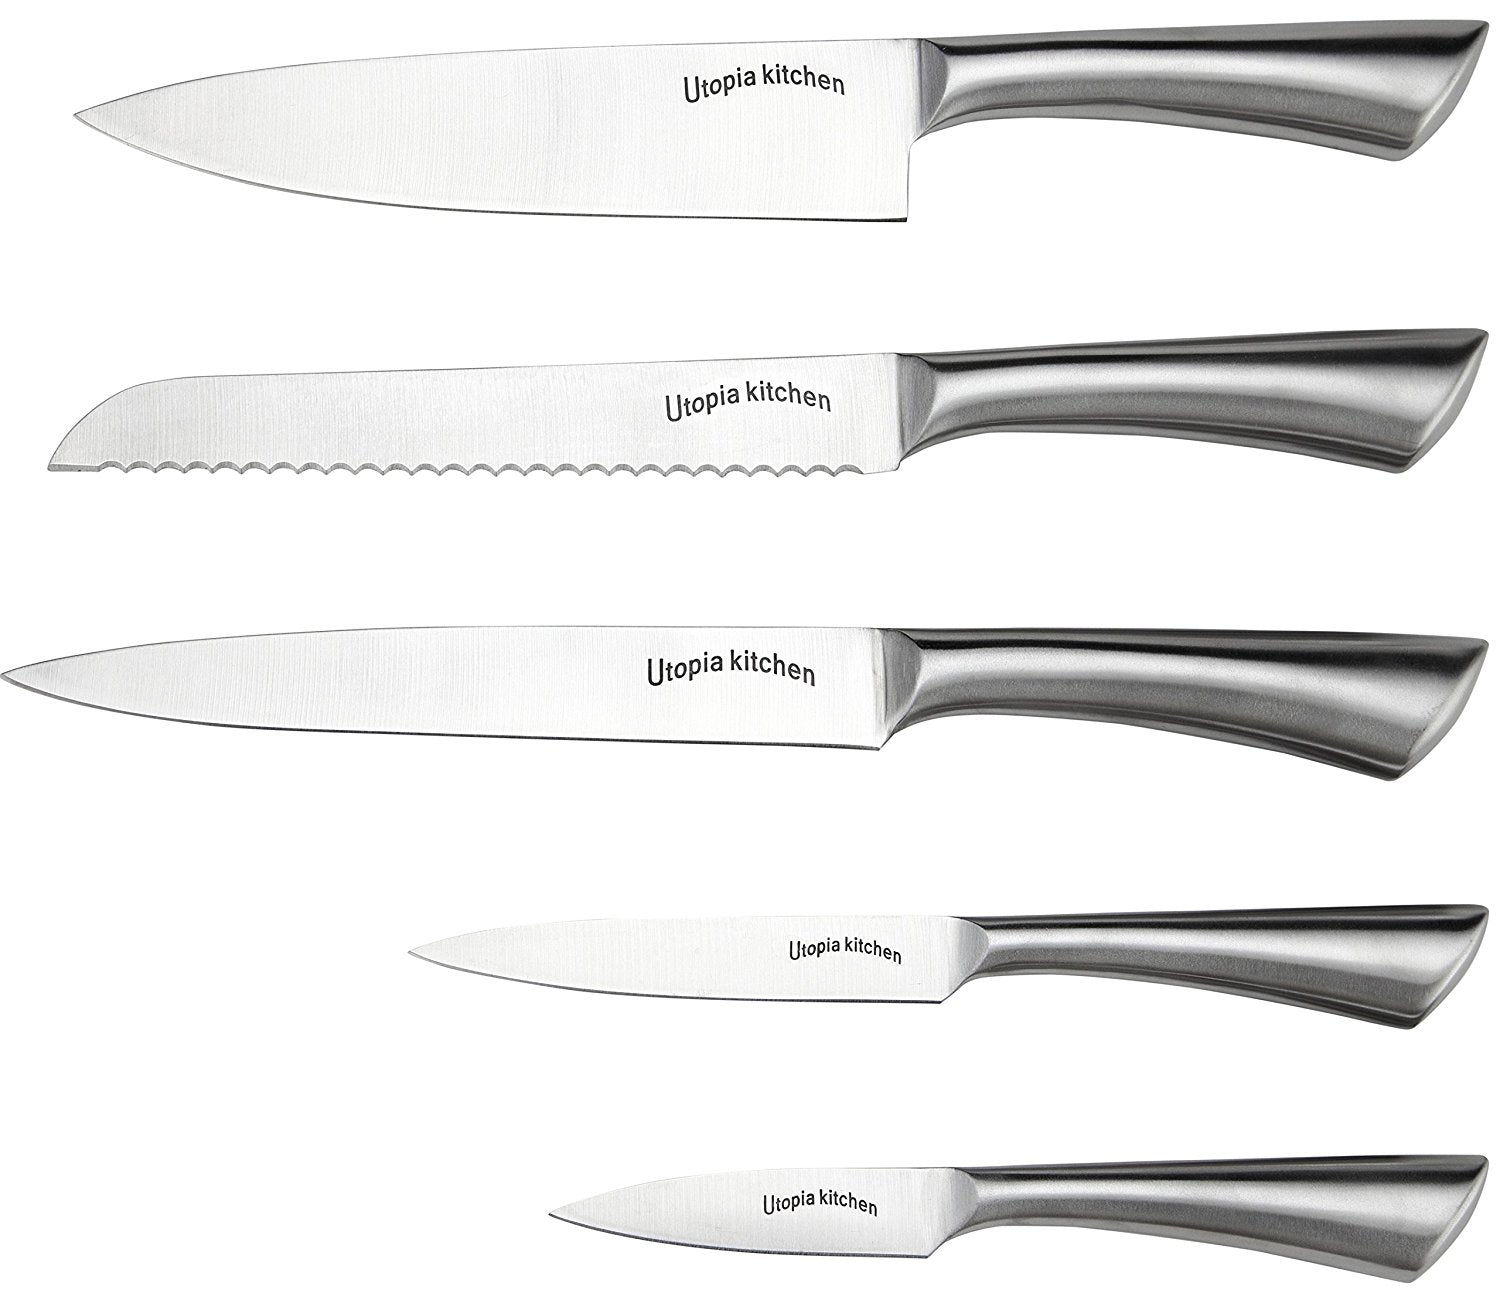 NETTA 6 Piece Stainless Steel Knife Set - Black, with Clear Storage Bl